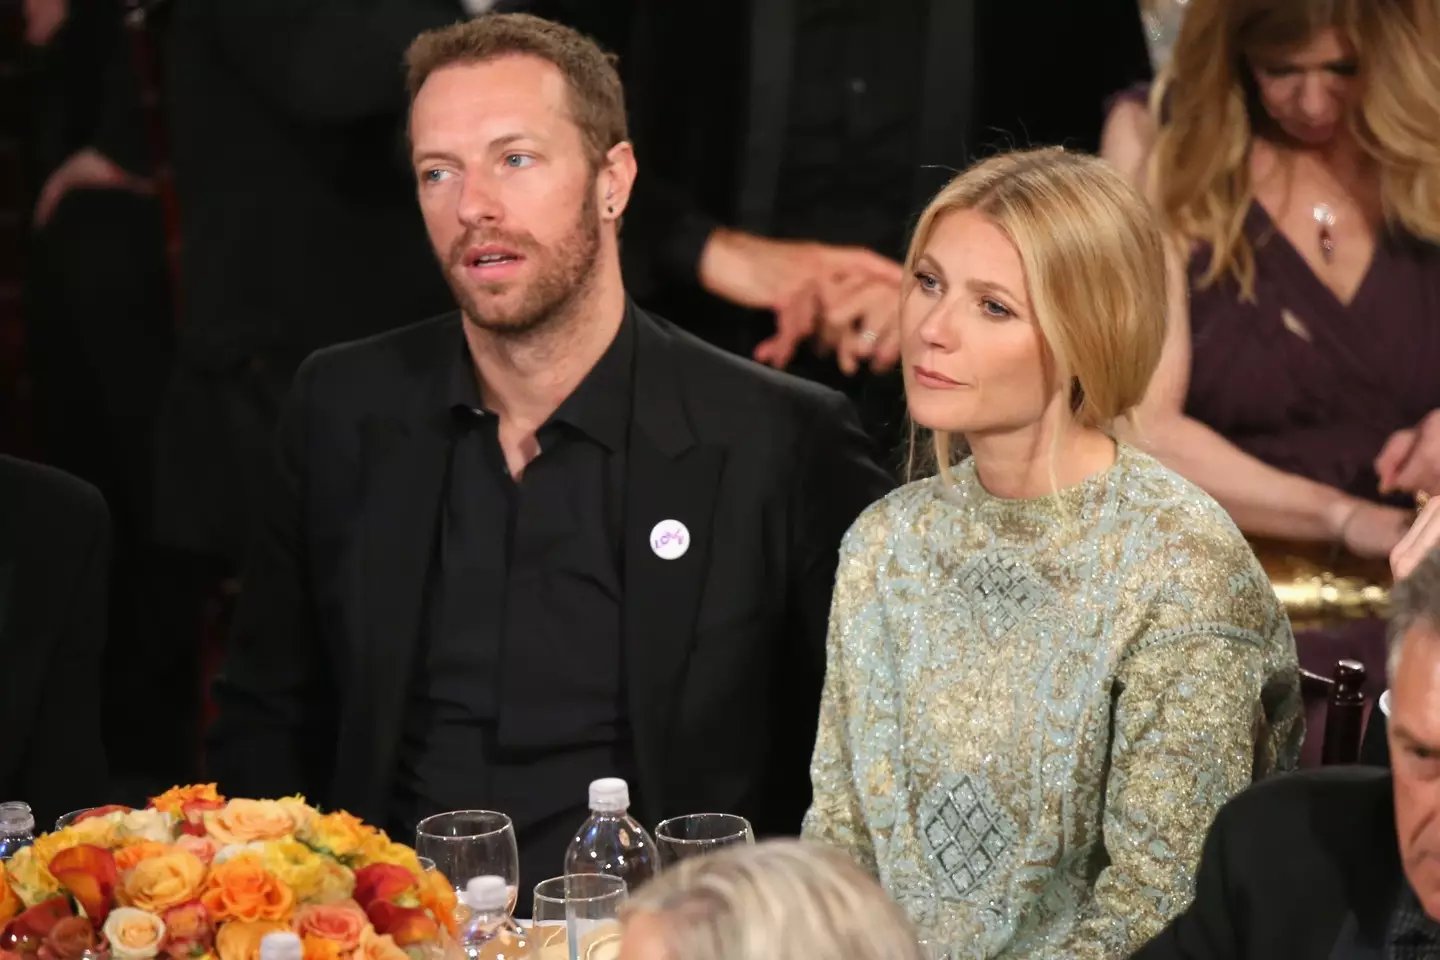 Chris was previously married to actor Gwyneth Paltrow.